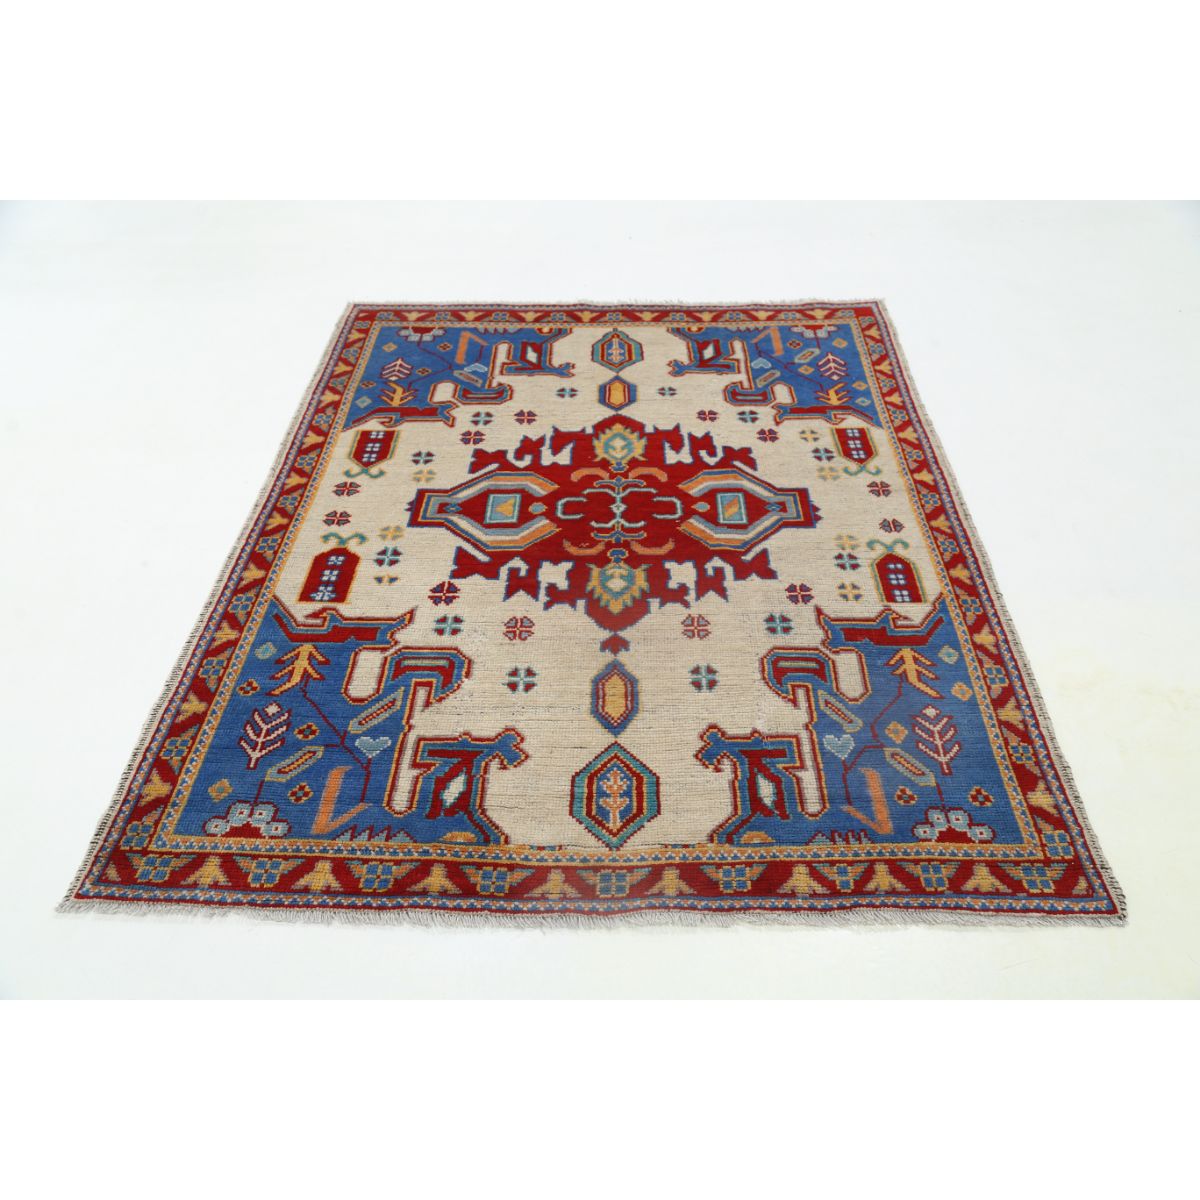 Revival 4' 11" X 6' 2" Wool Hand Knotted Rug